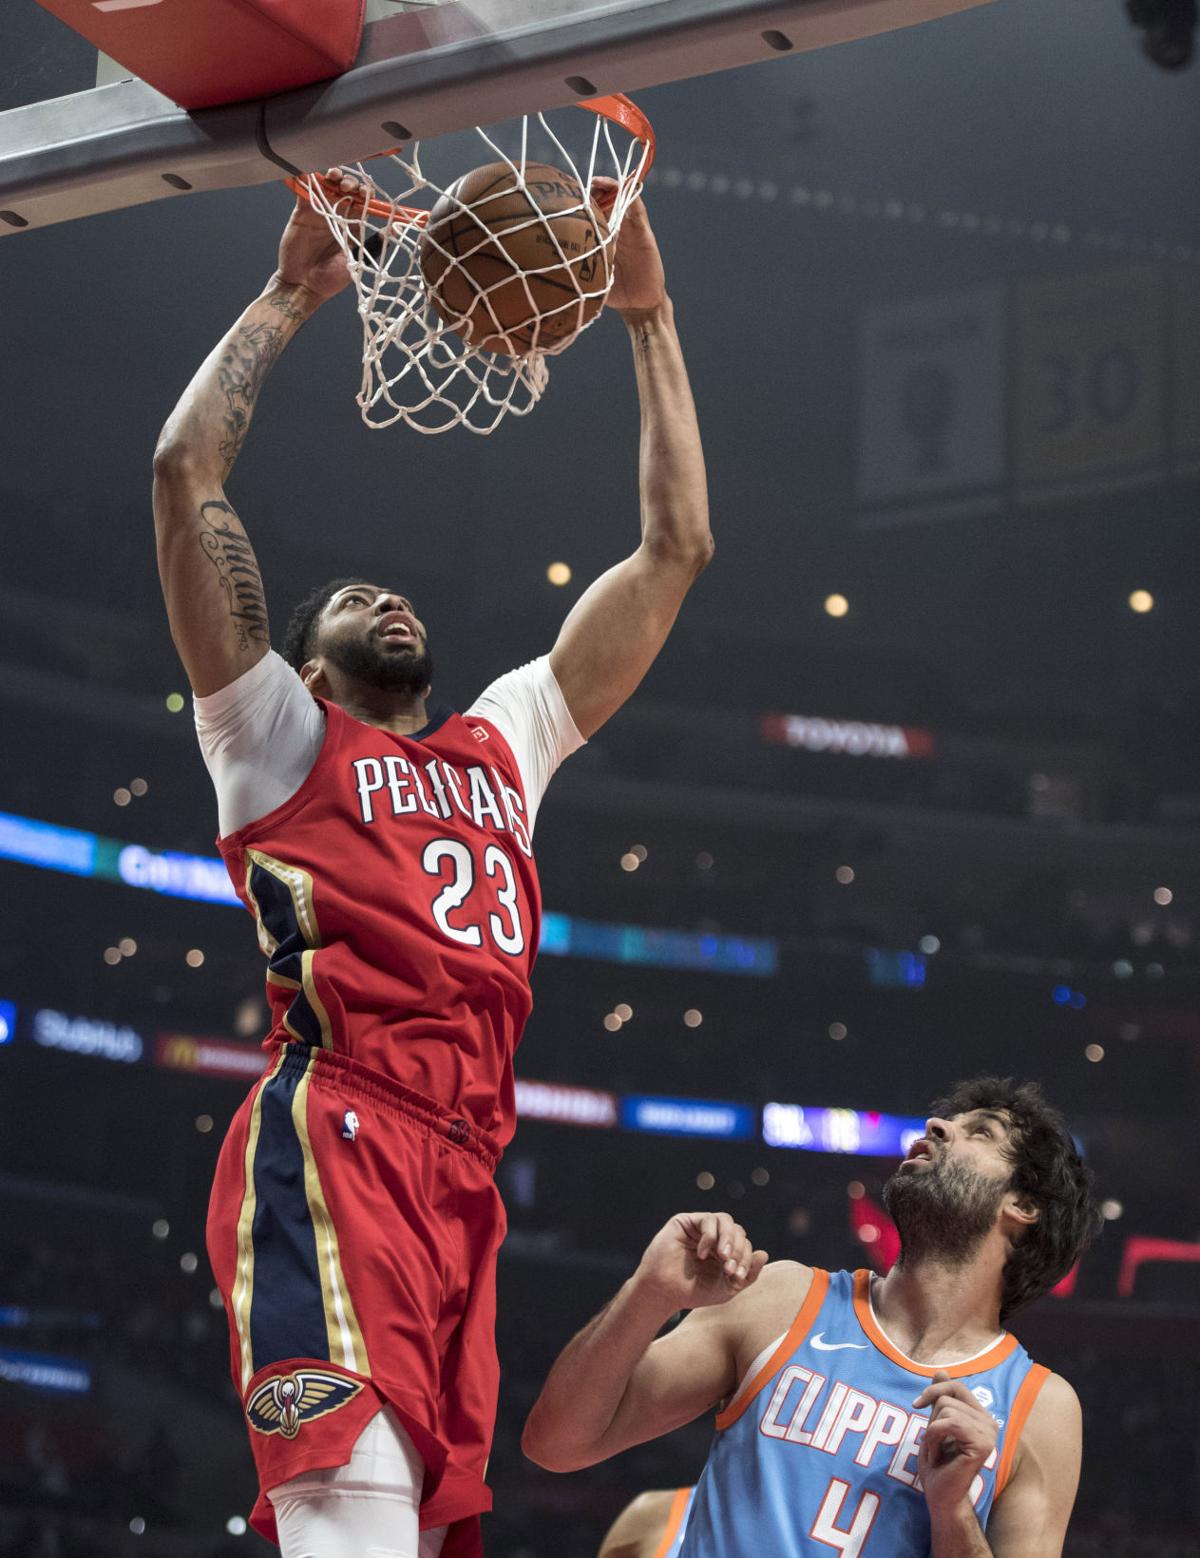 A possible clincher: Pelicans to meet Clippers one win shy of sealing spot in ...